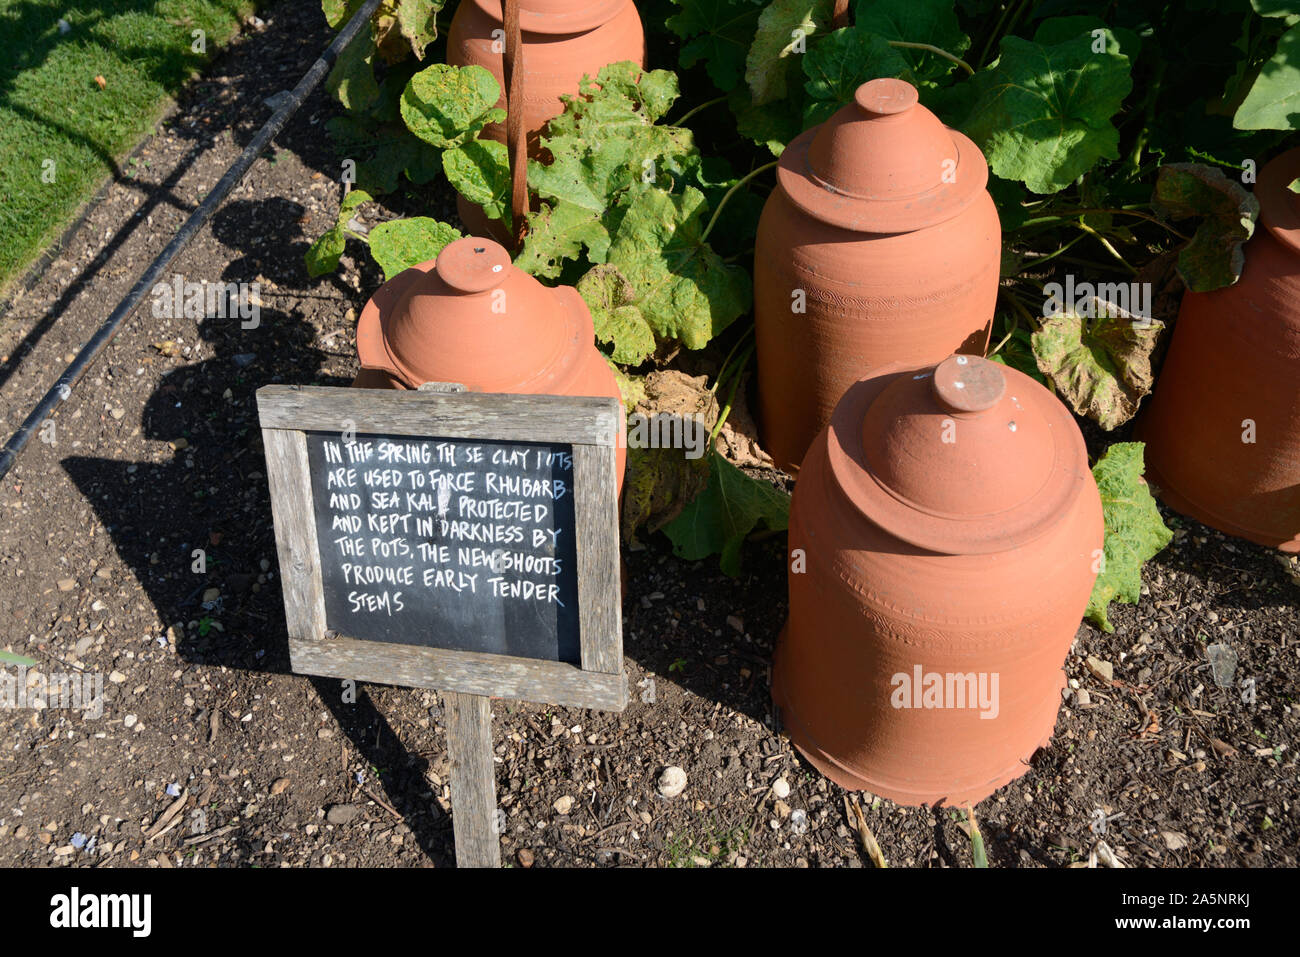 Pottery Forcing Pots, Terracotta Rhubarb Forcers, or Bell-Shaped Pots in Kitchen Garden, University of Oxford Botanic Garden Oxford England Stock Photo